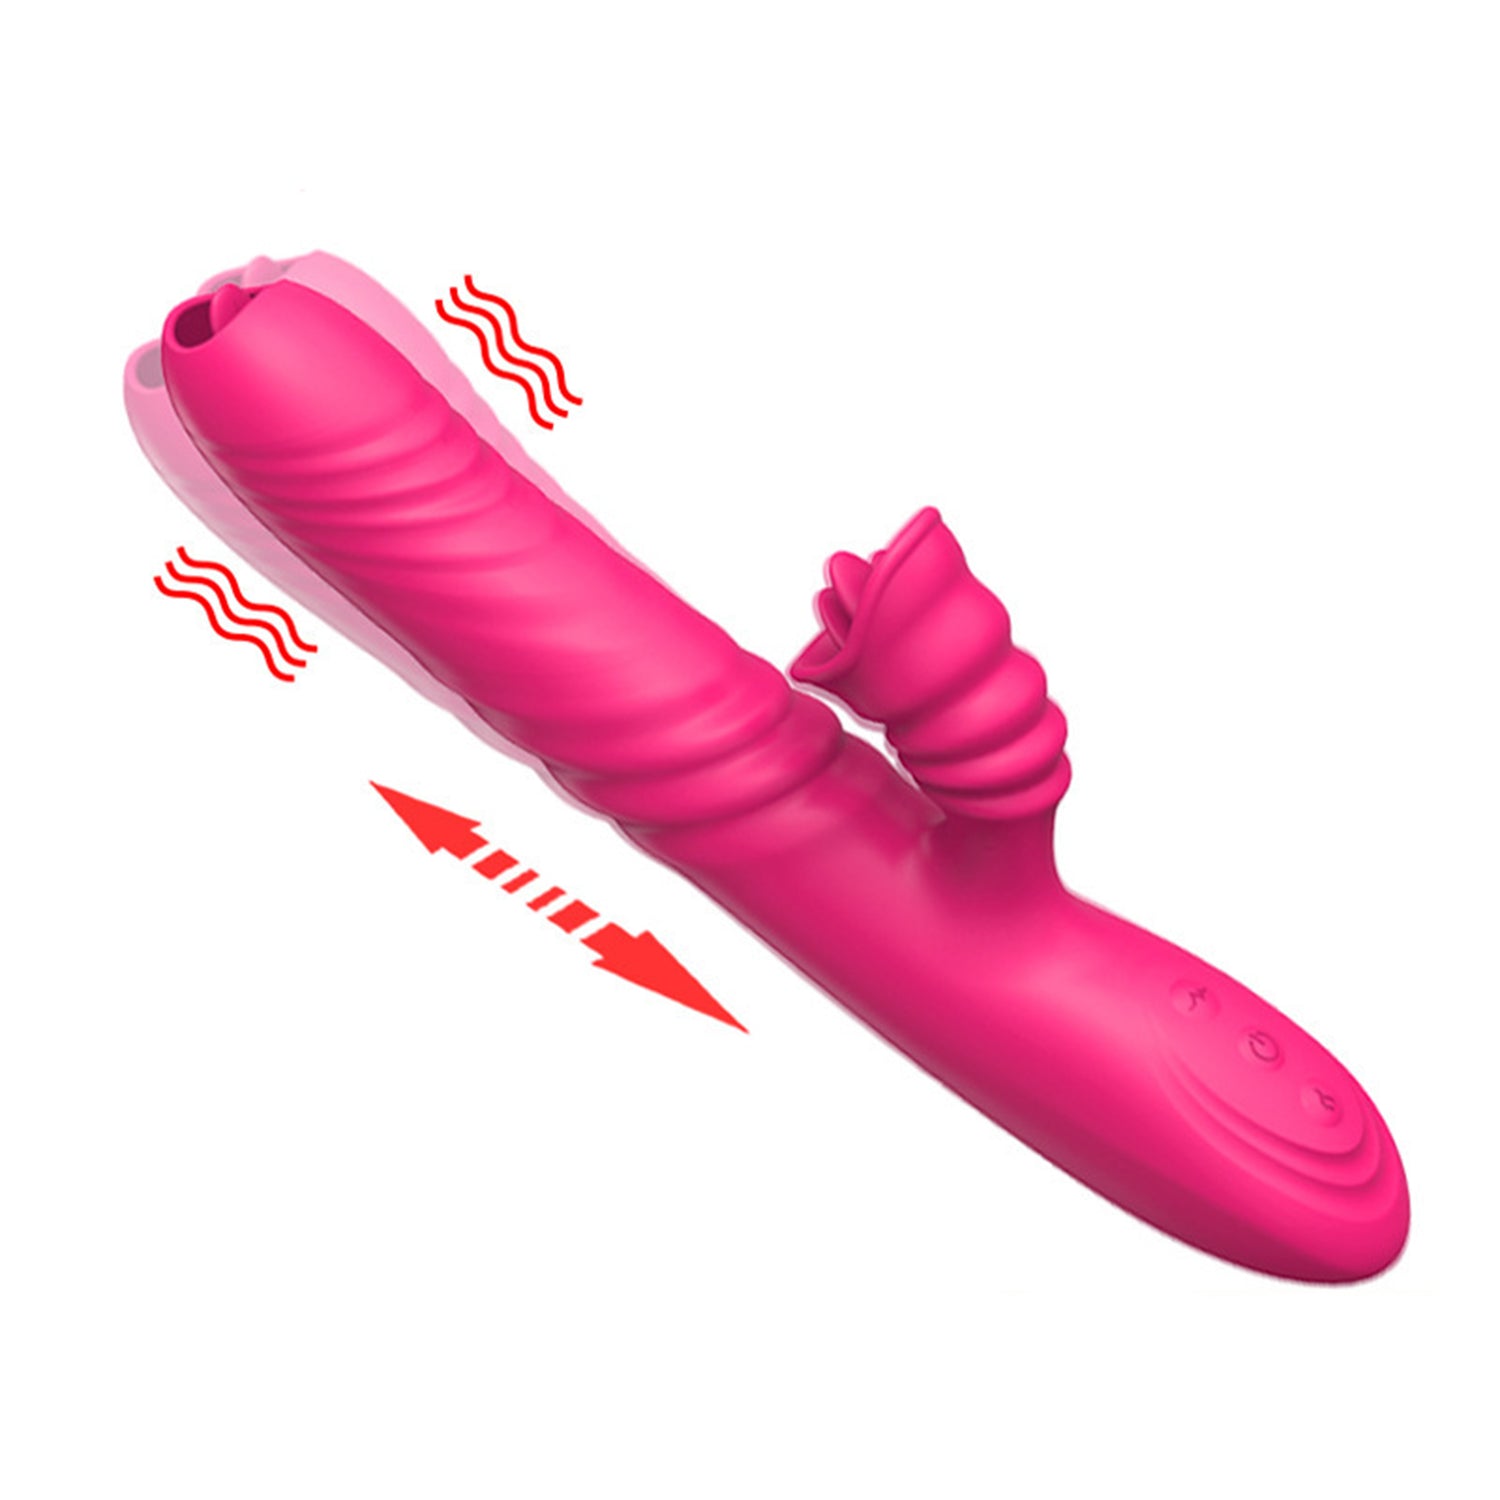 Beaded Thrusting Rabbit Vibrator -  Triple Action G Spot Vibrator with Independent Clitoral Stimulator, 10 Patterns, Waterproof & Rechargeable Sex Toys for Women with Tongue licking,Rose